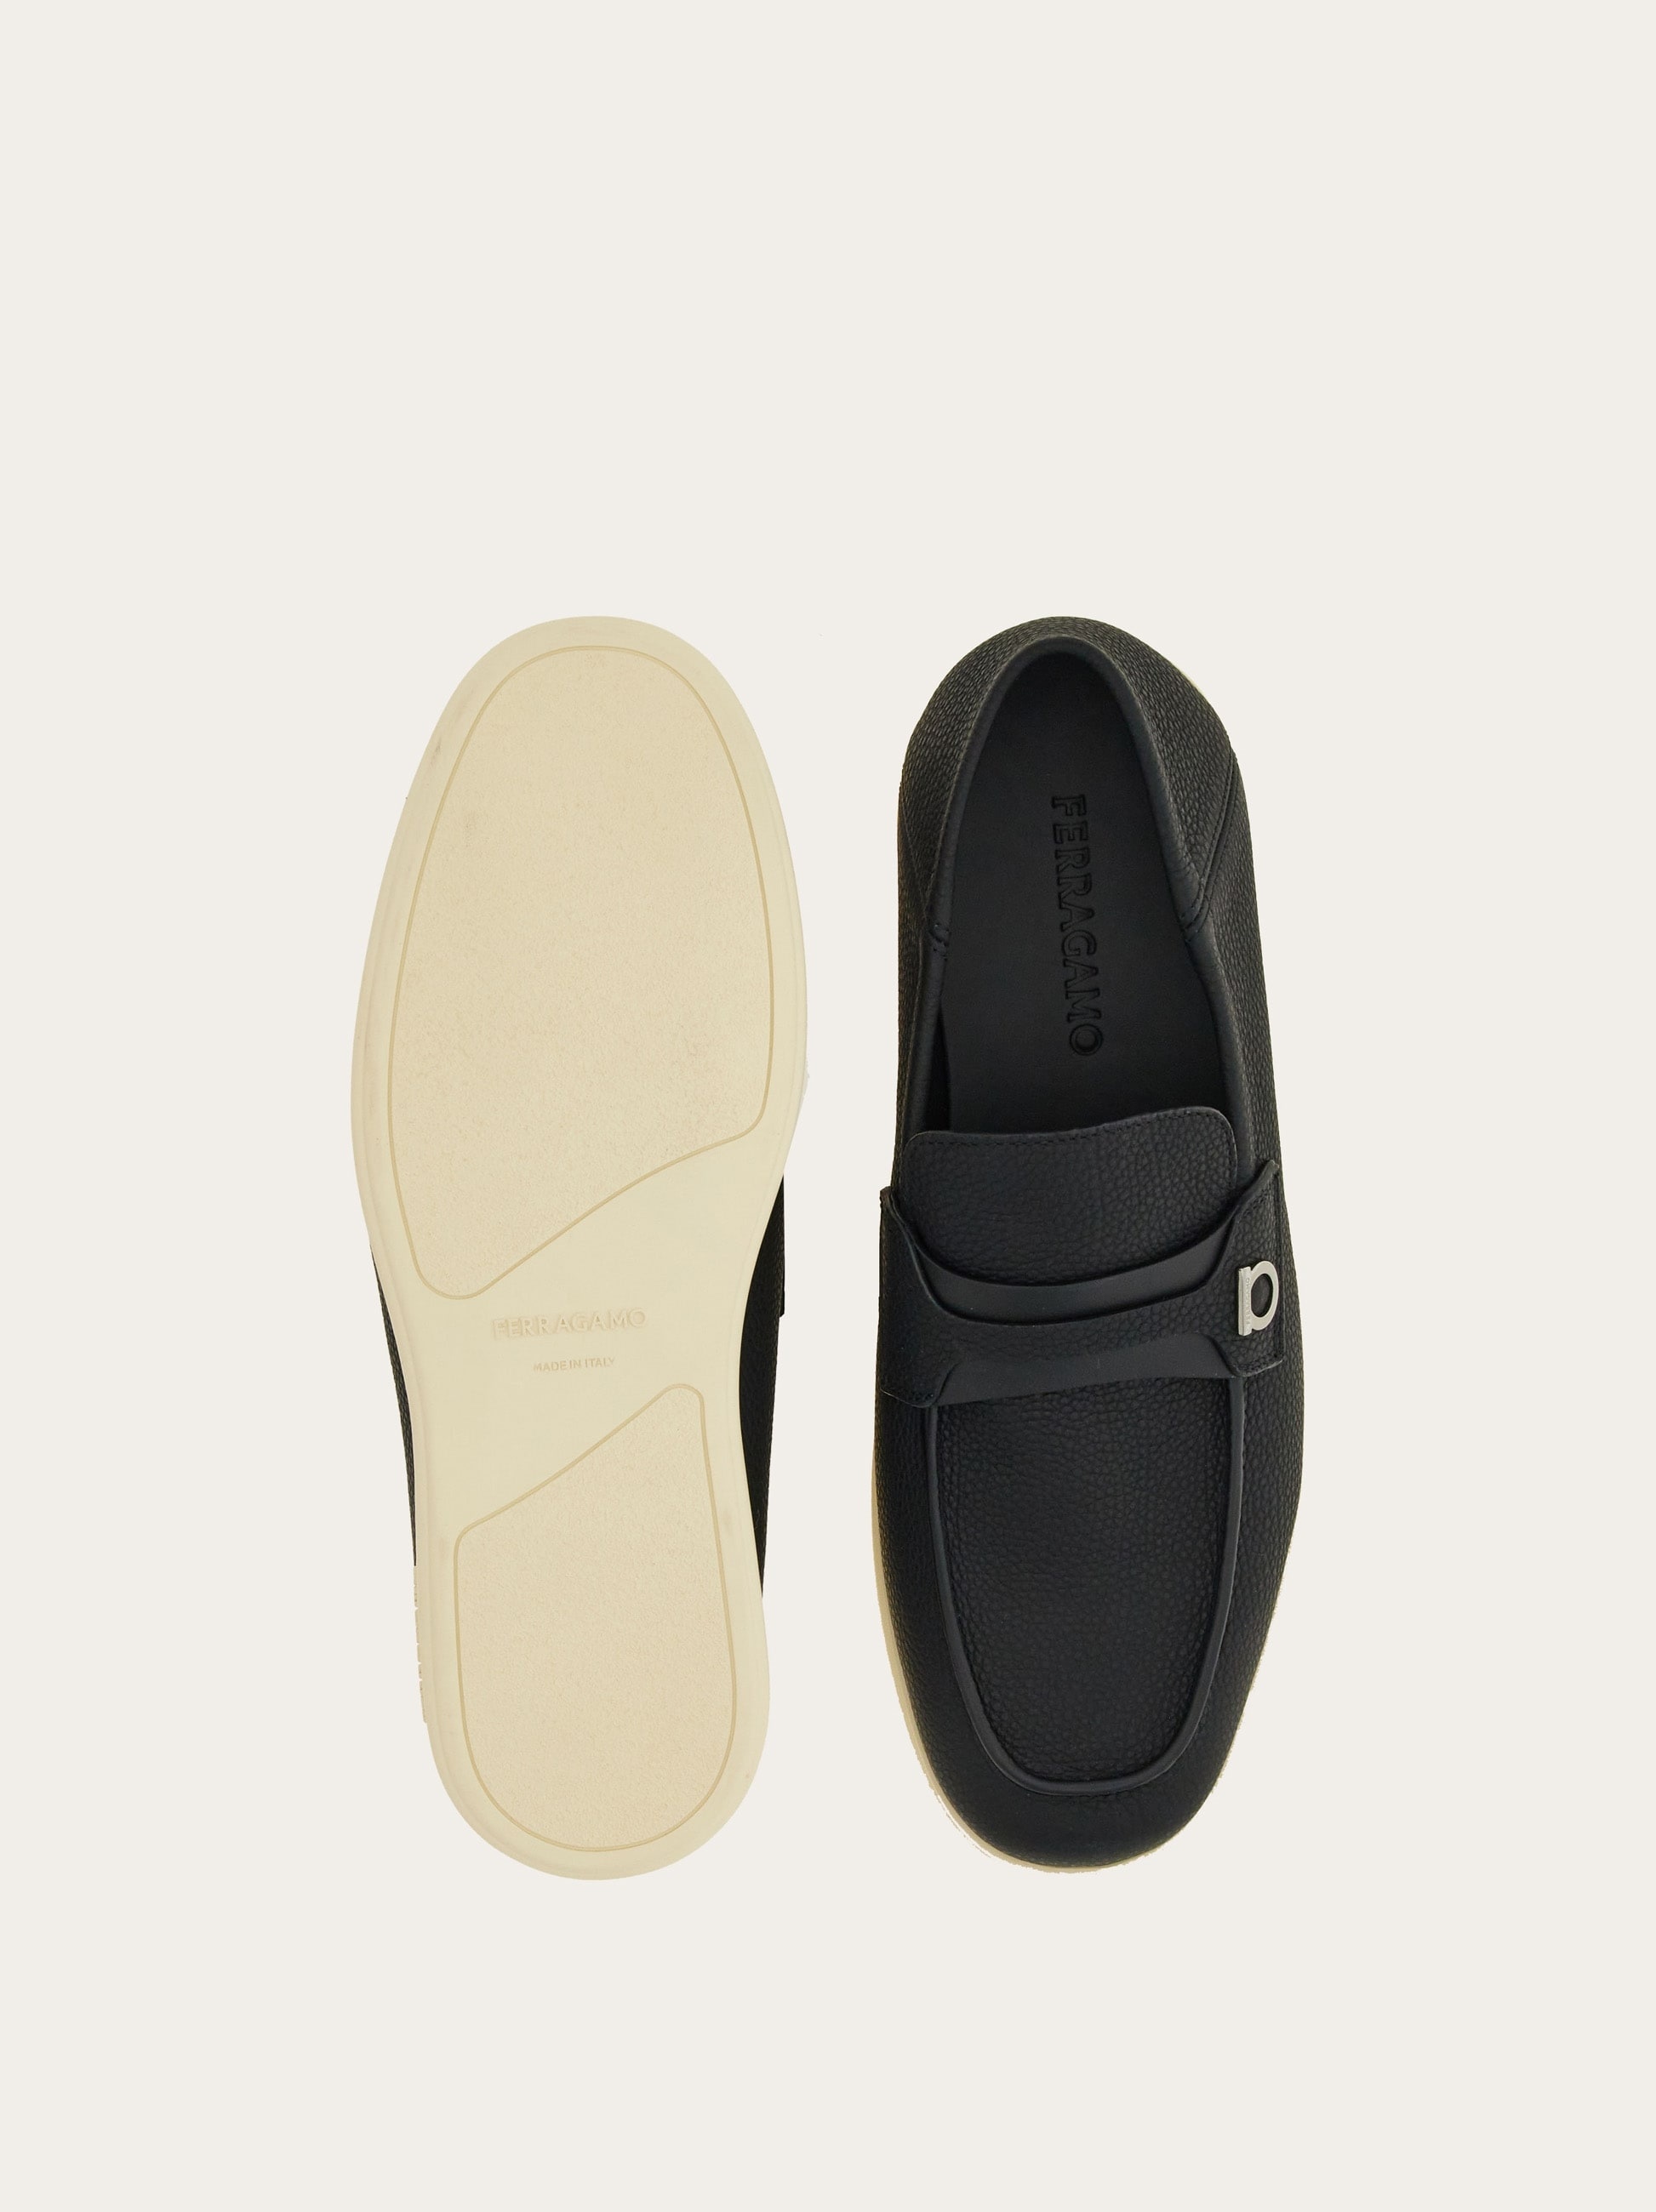 Deconstructed loafer with Gancini ornament - 5